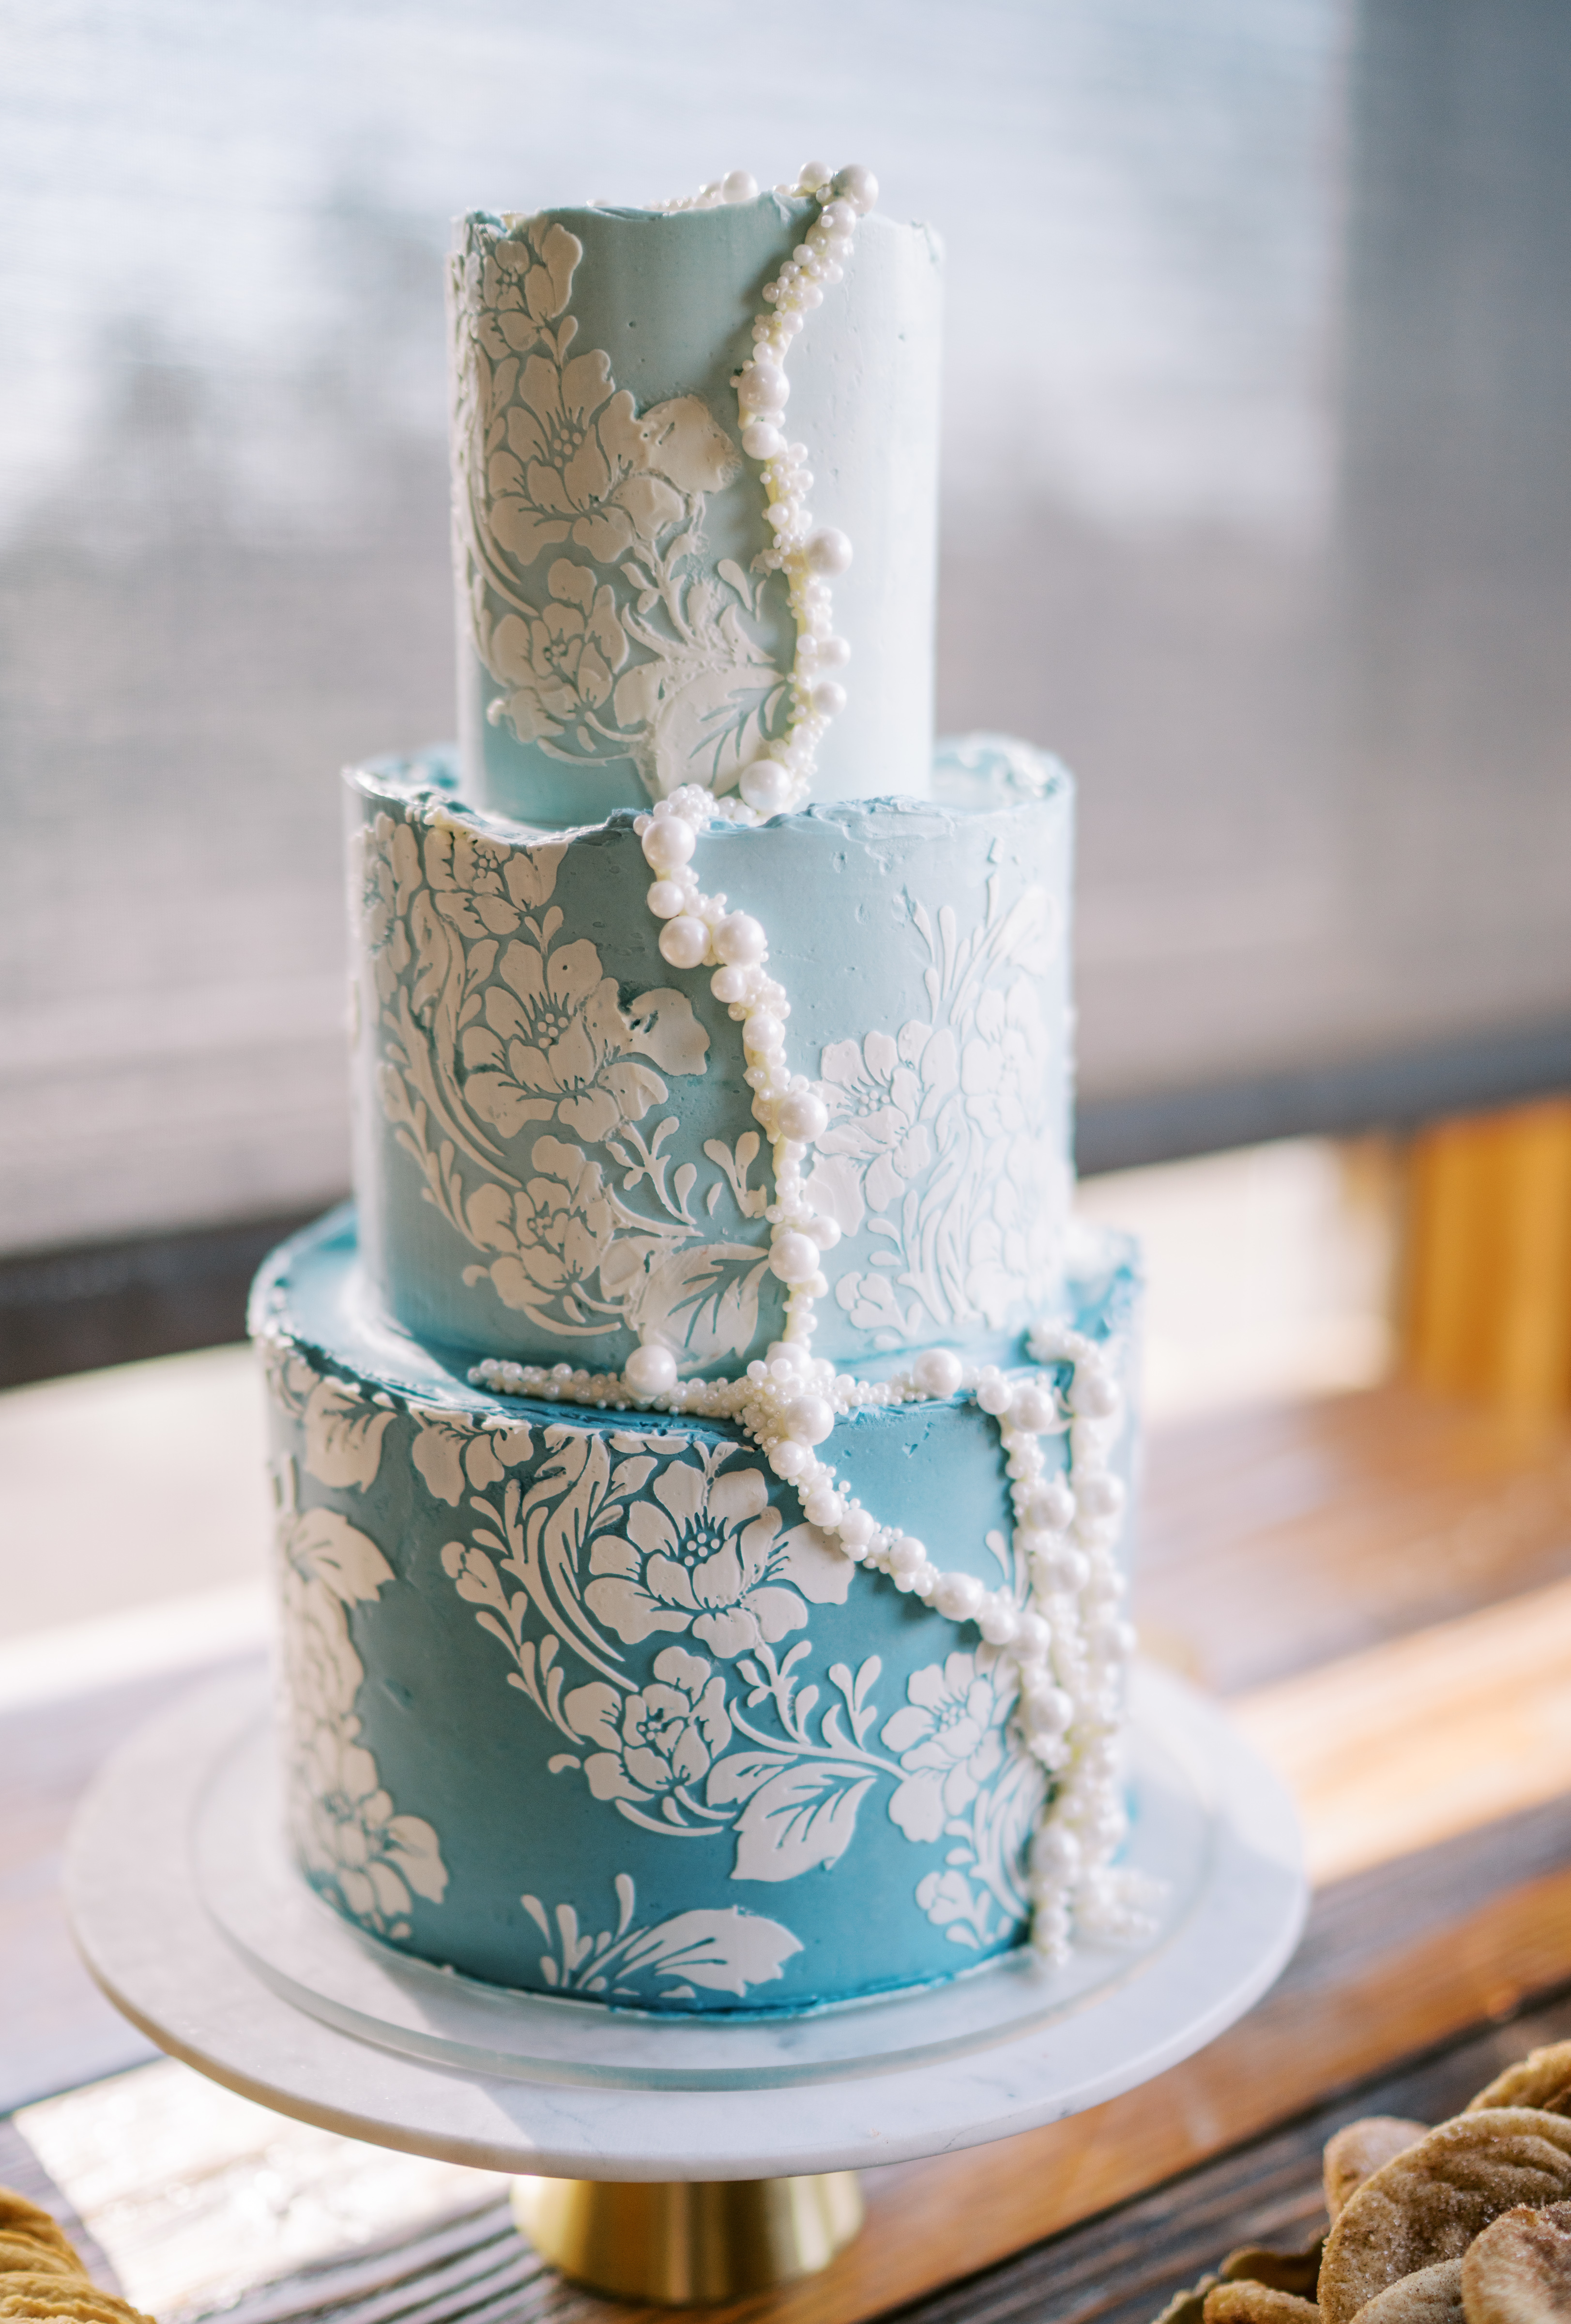 Ombre Blue Wedding Cake with Floral Stenciling - Crumb Cakery - Brasada Ranch Wedding